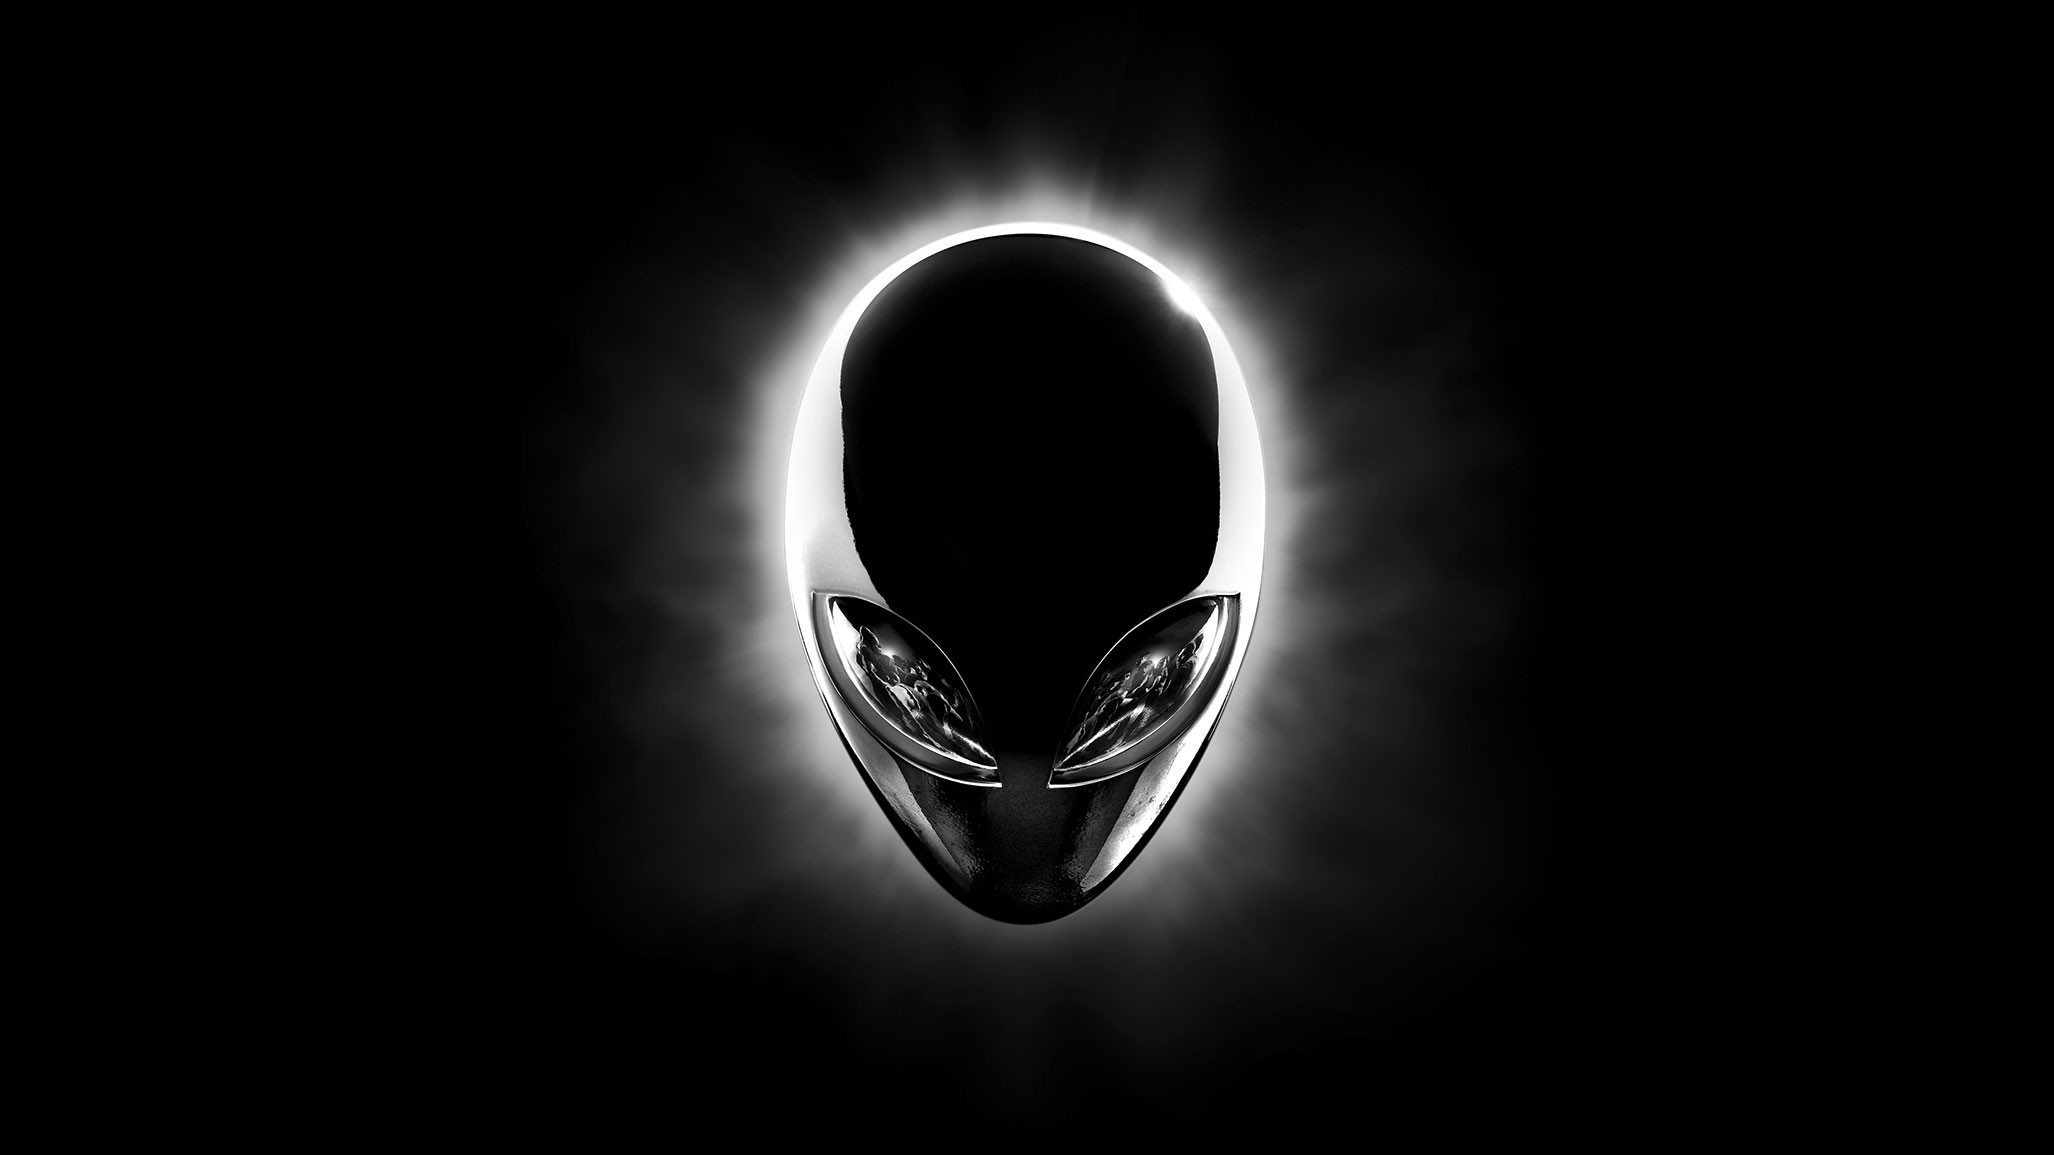 2054x1155 Alienware Chrome Head Wallpaper - what do you think is depicted in the  alien's eyes?